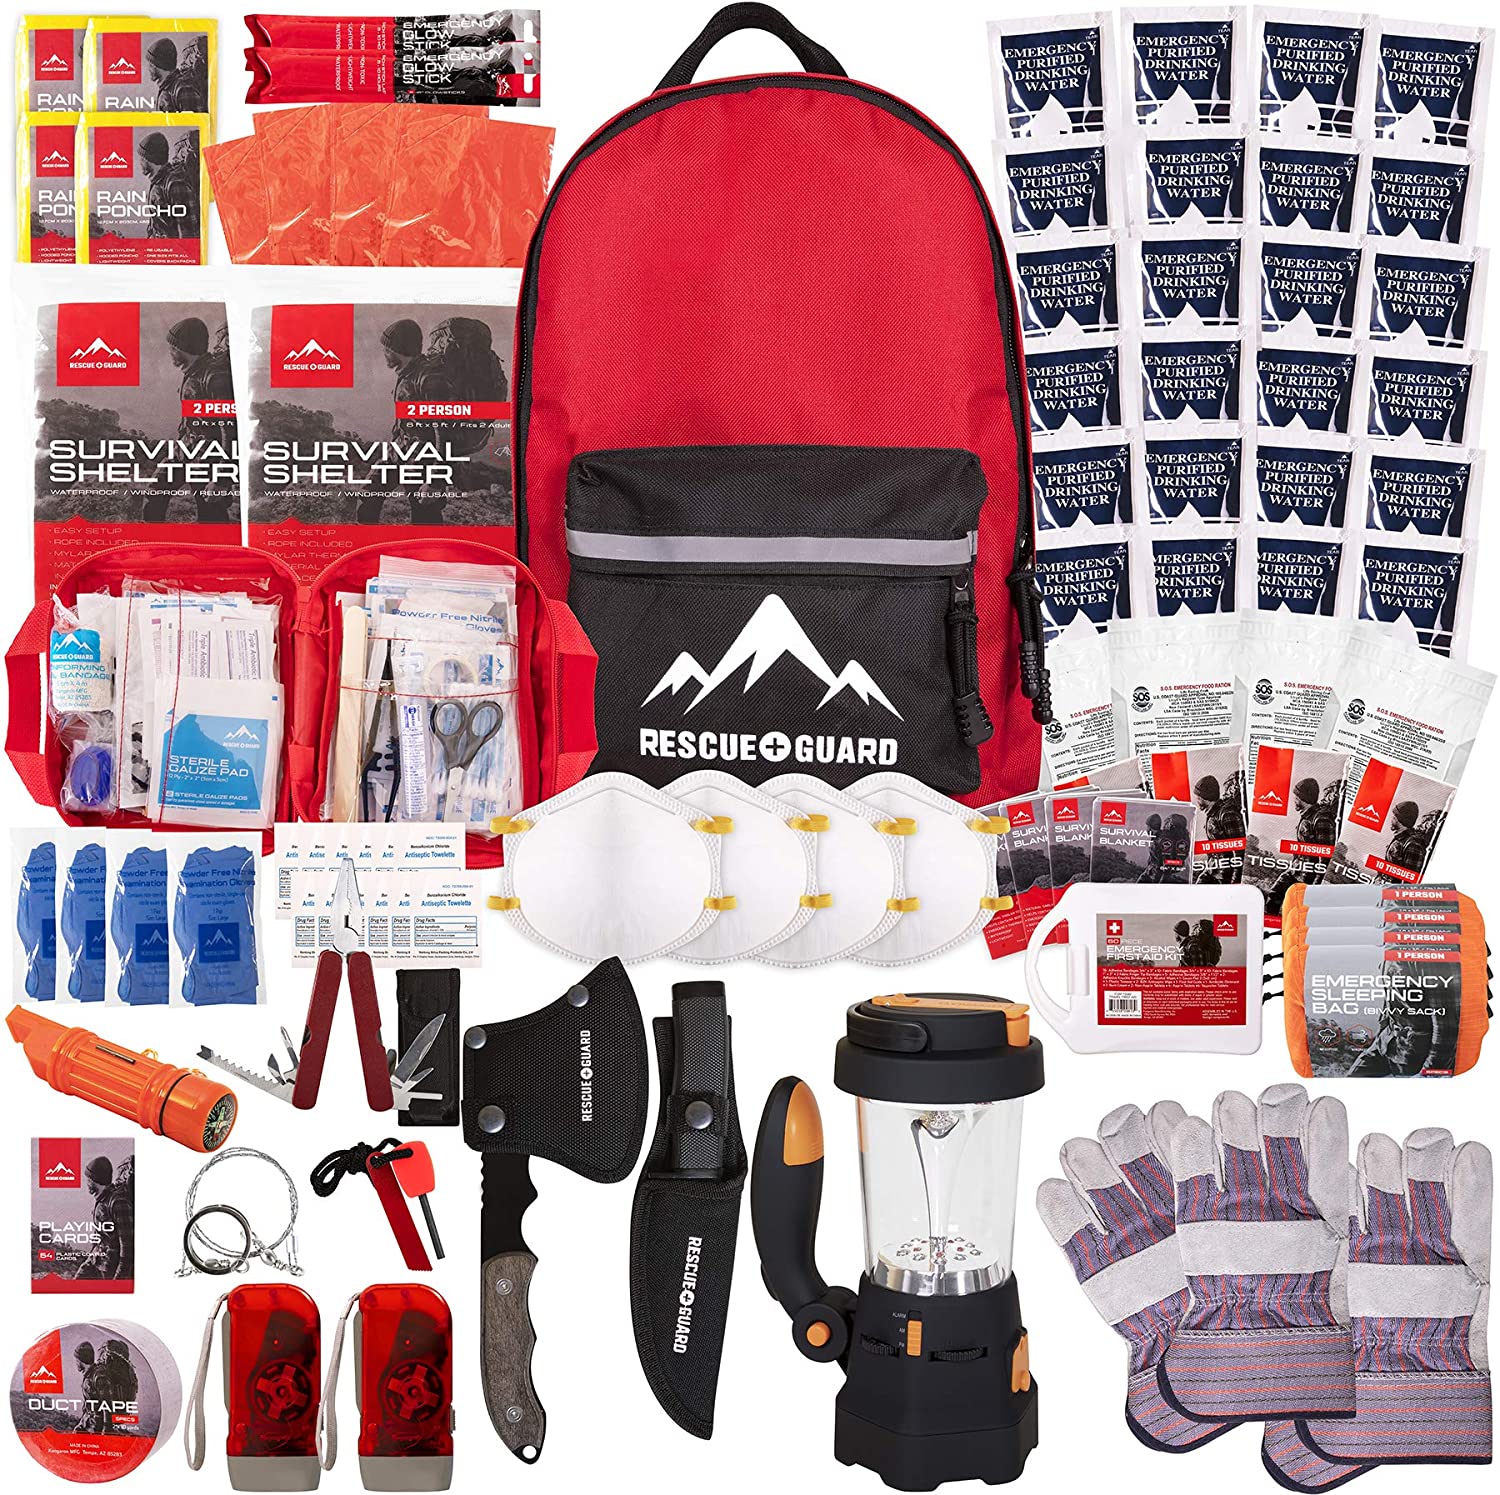 Rescue Guard Advanced First Aid Survival kit